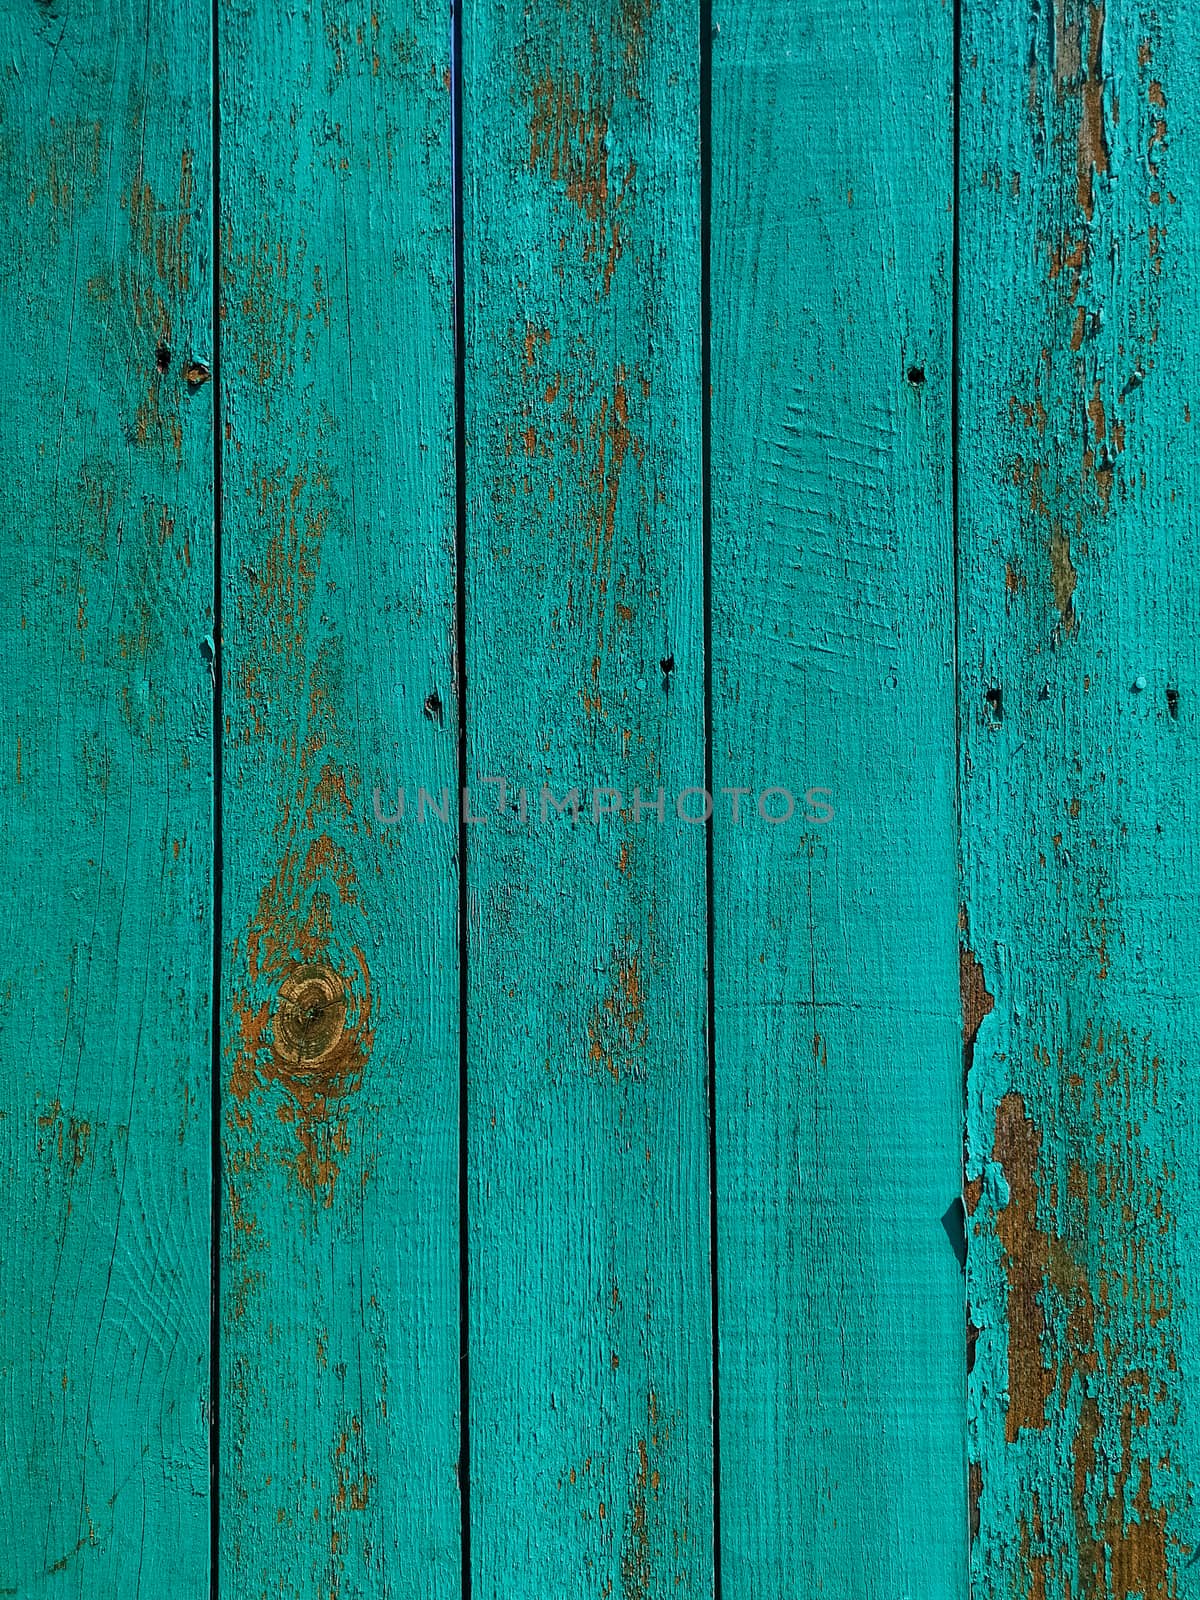 Green wood texture background. .Old ragged painted fence